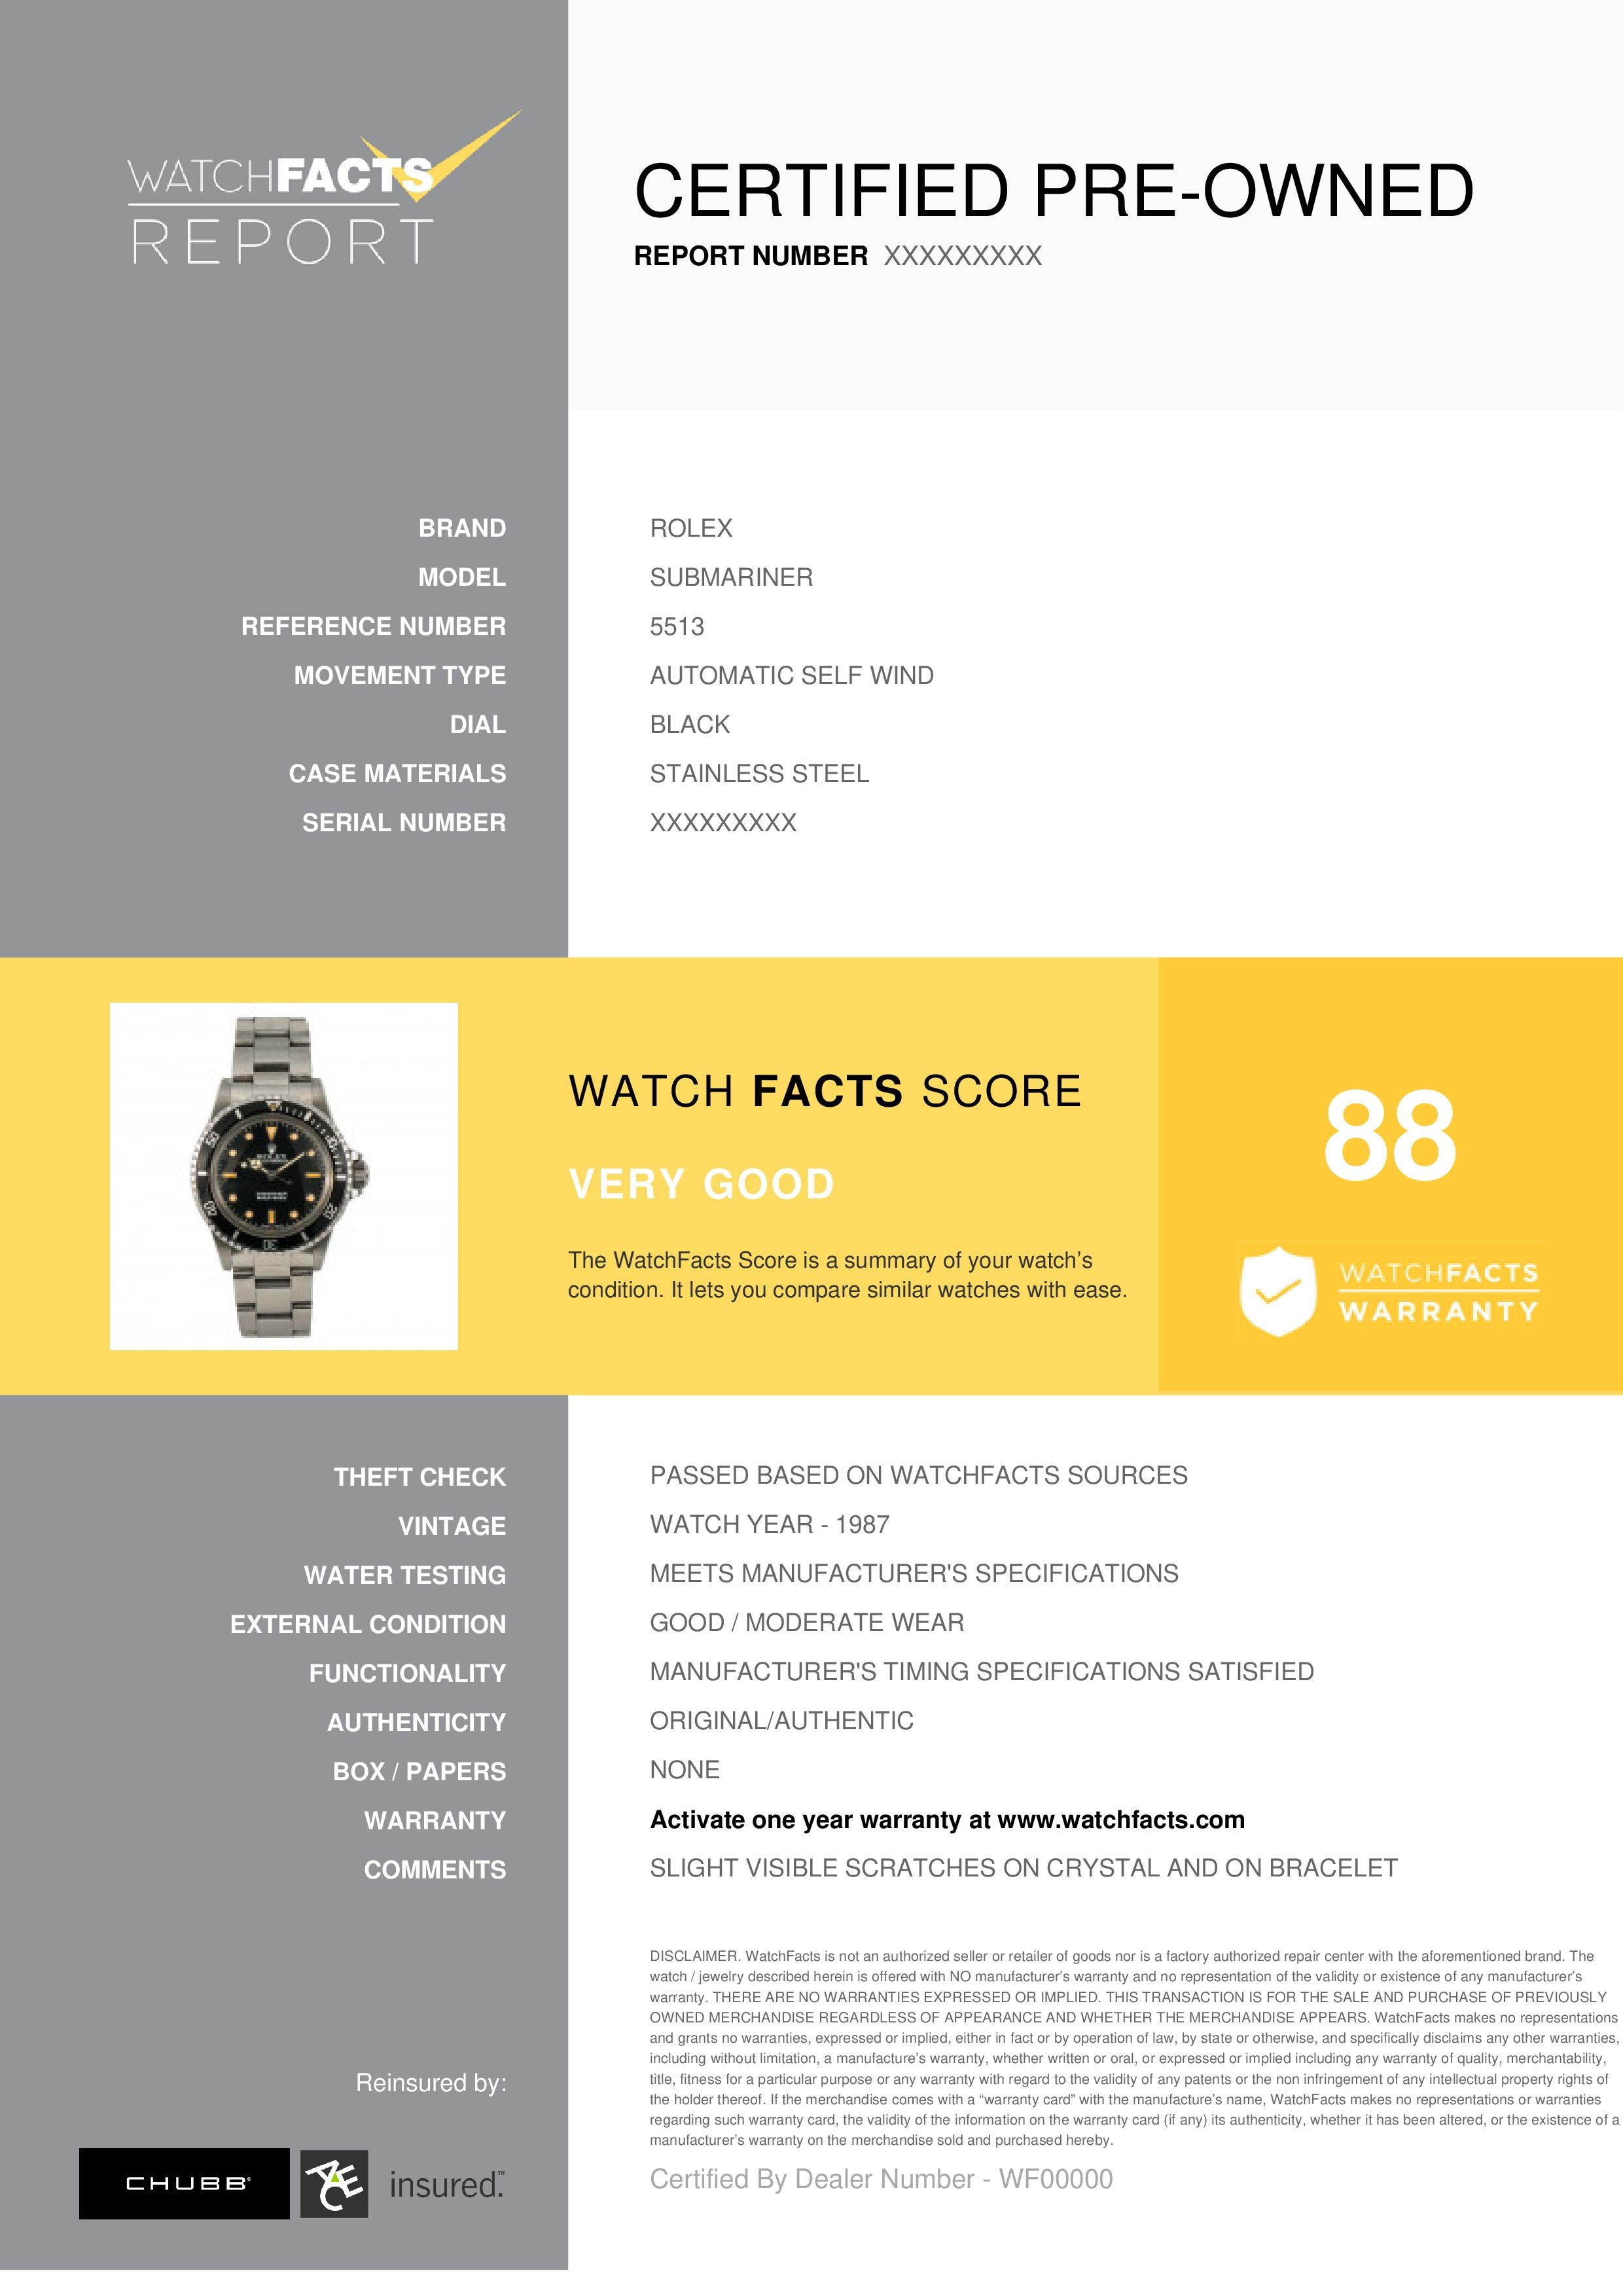 Rolex Submariner Reference #:5513. Rolex Submariner 5513 Vintage Bart Simpson R Serial Men's Automatic Watch 40mm. Verified and Certified by WatchFacts. 1 year warranty offered by WatchFacts.
